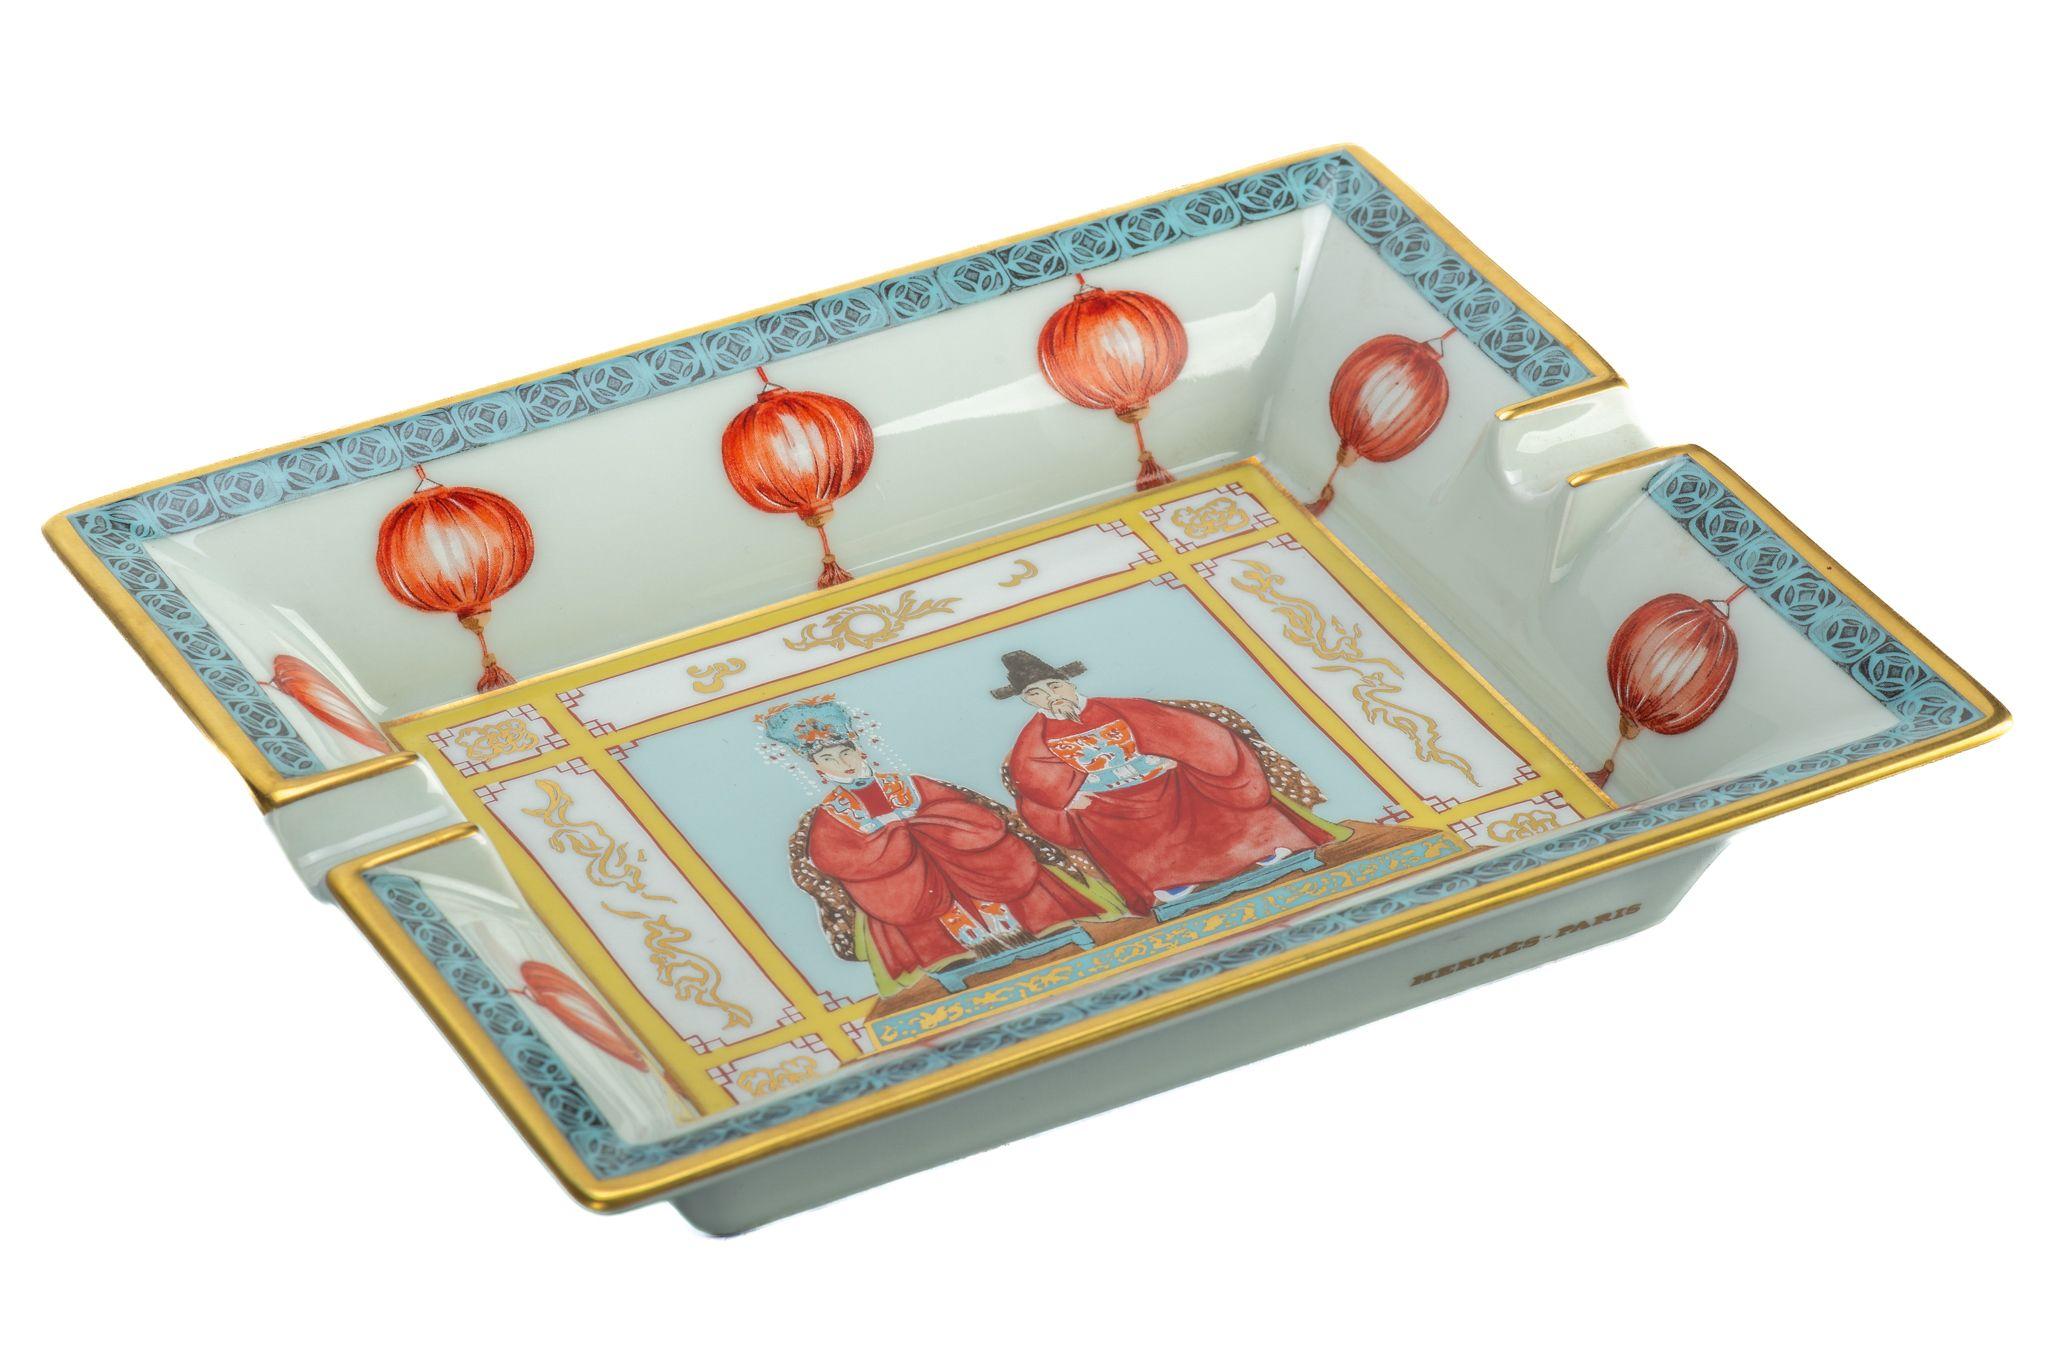 Hermes light blue, yellow and red porcelain ashtray with Chinese figures design
